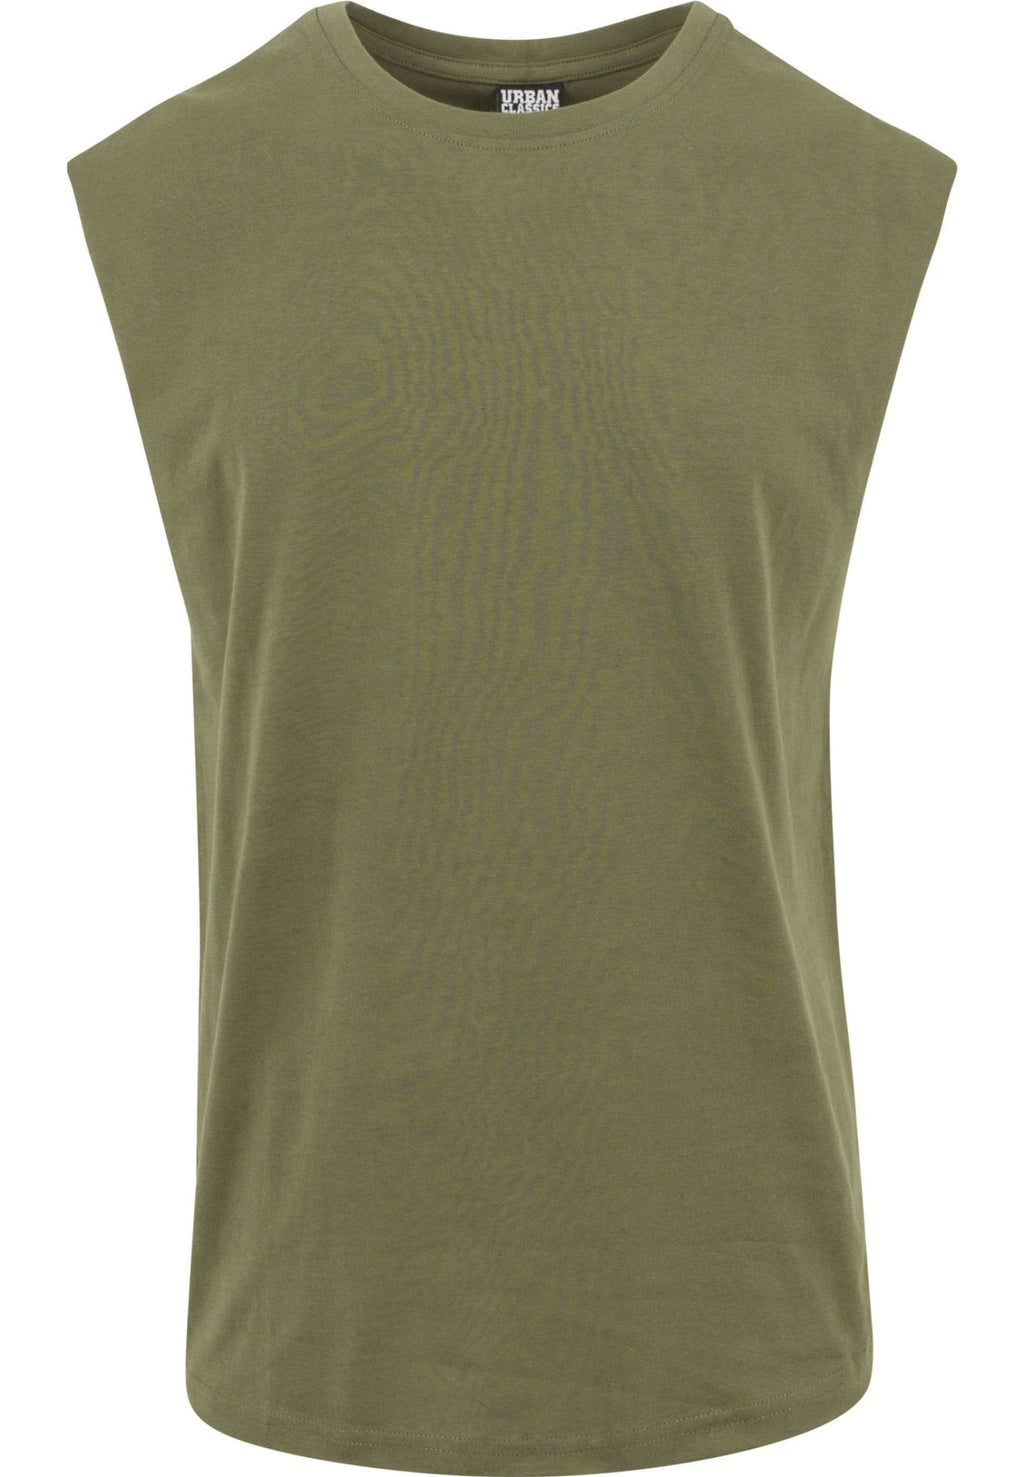 Tee sans manches - Olive